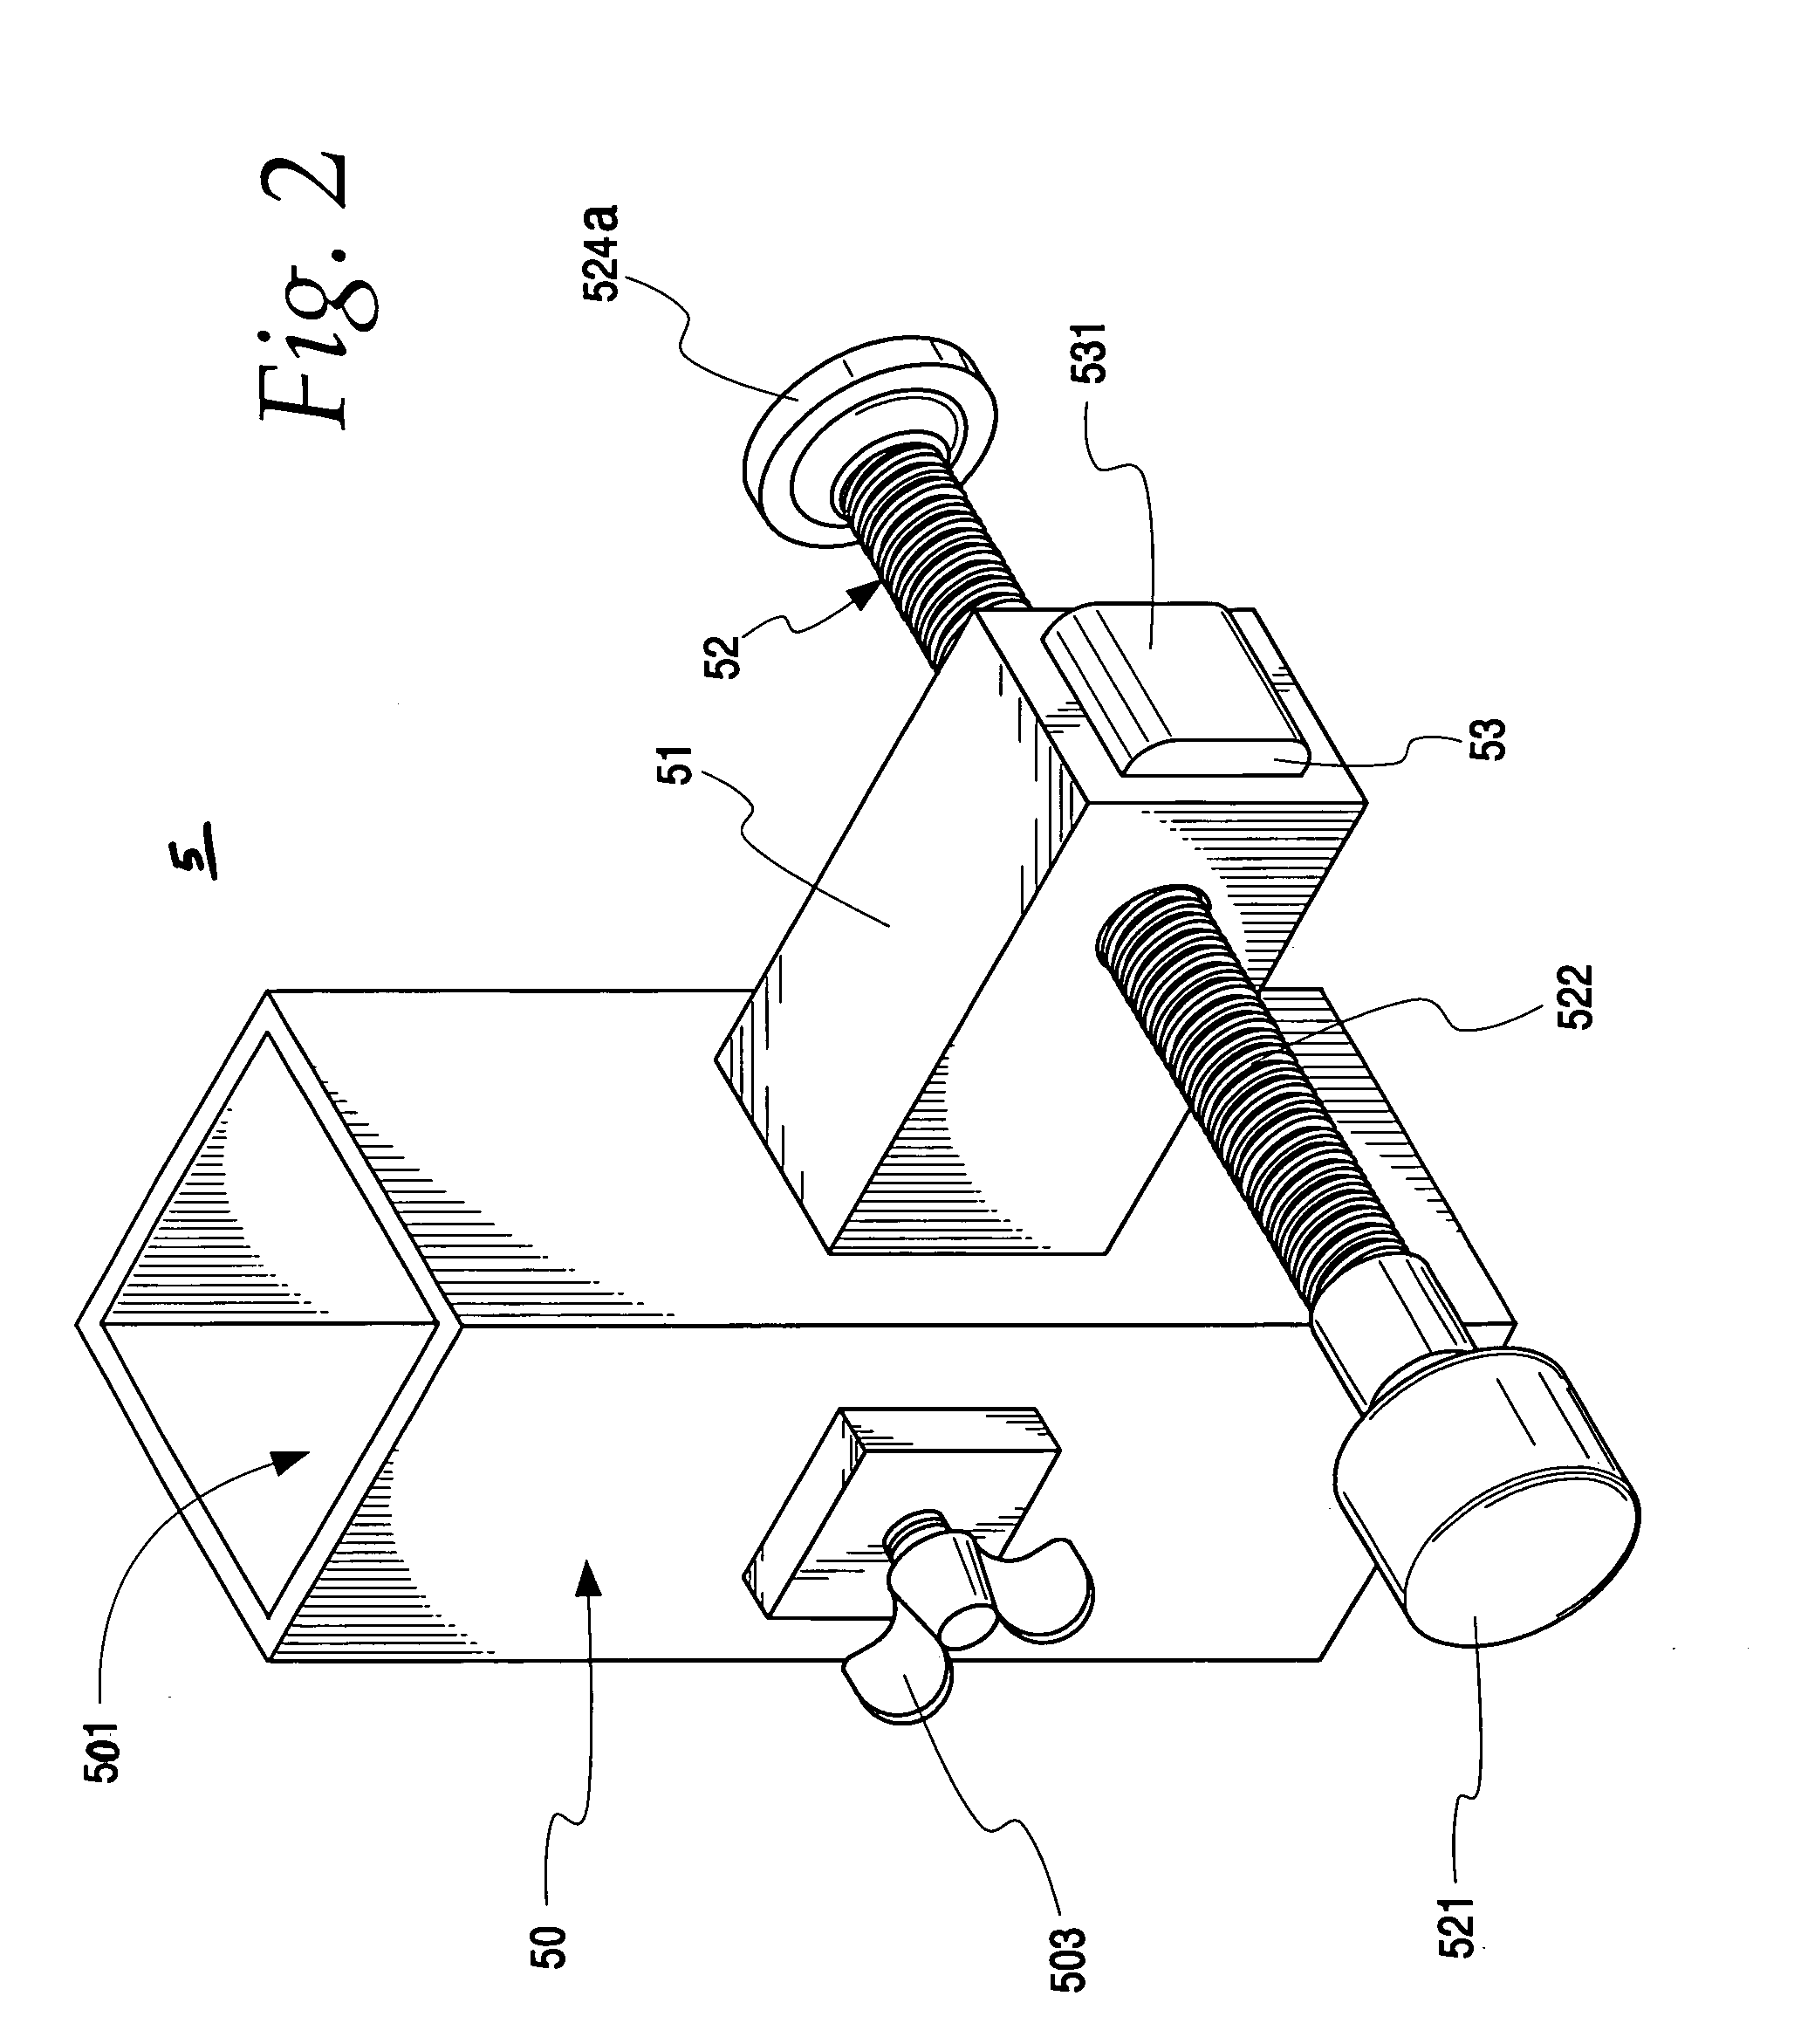 Adjustable clamp assembly